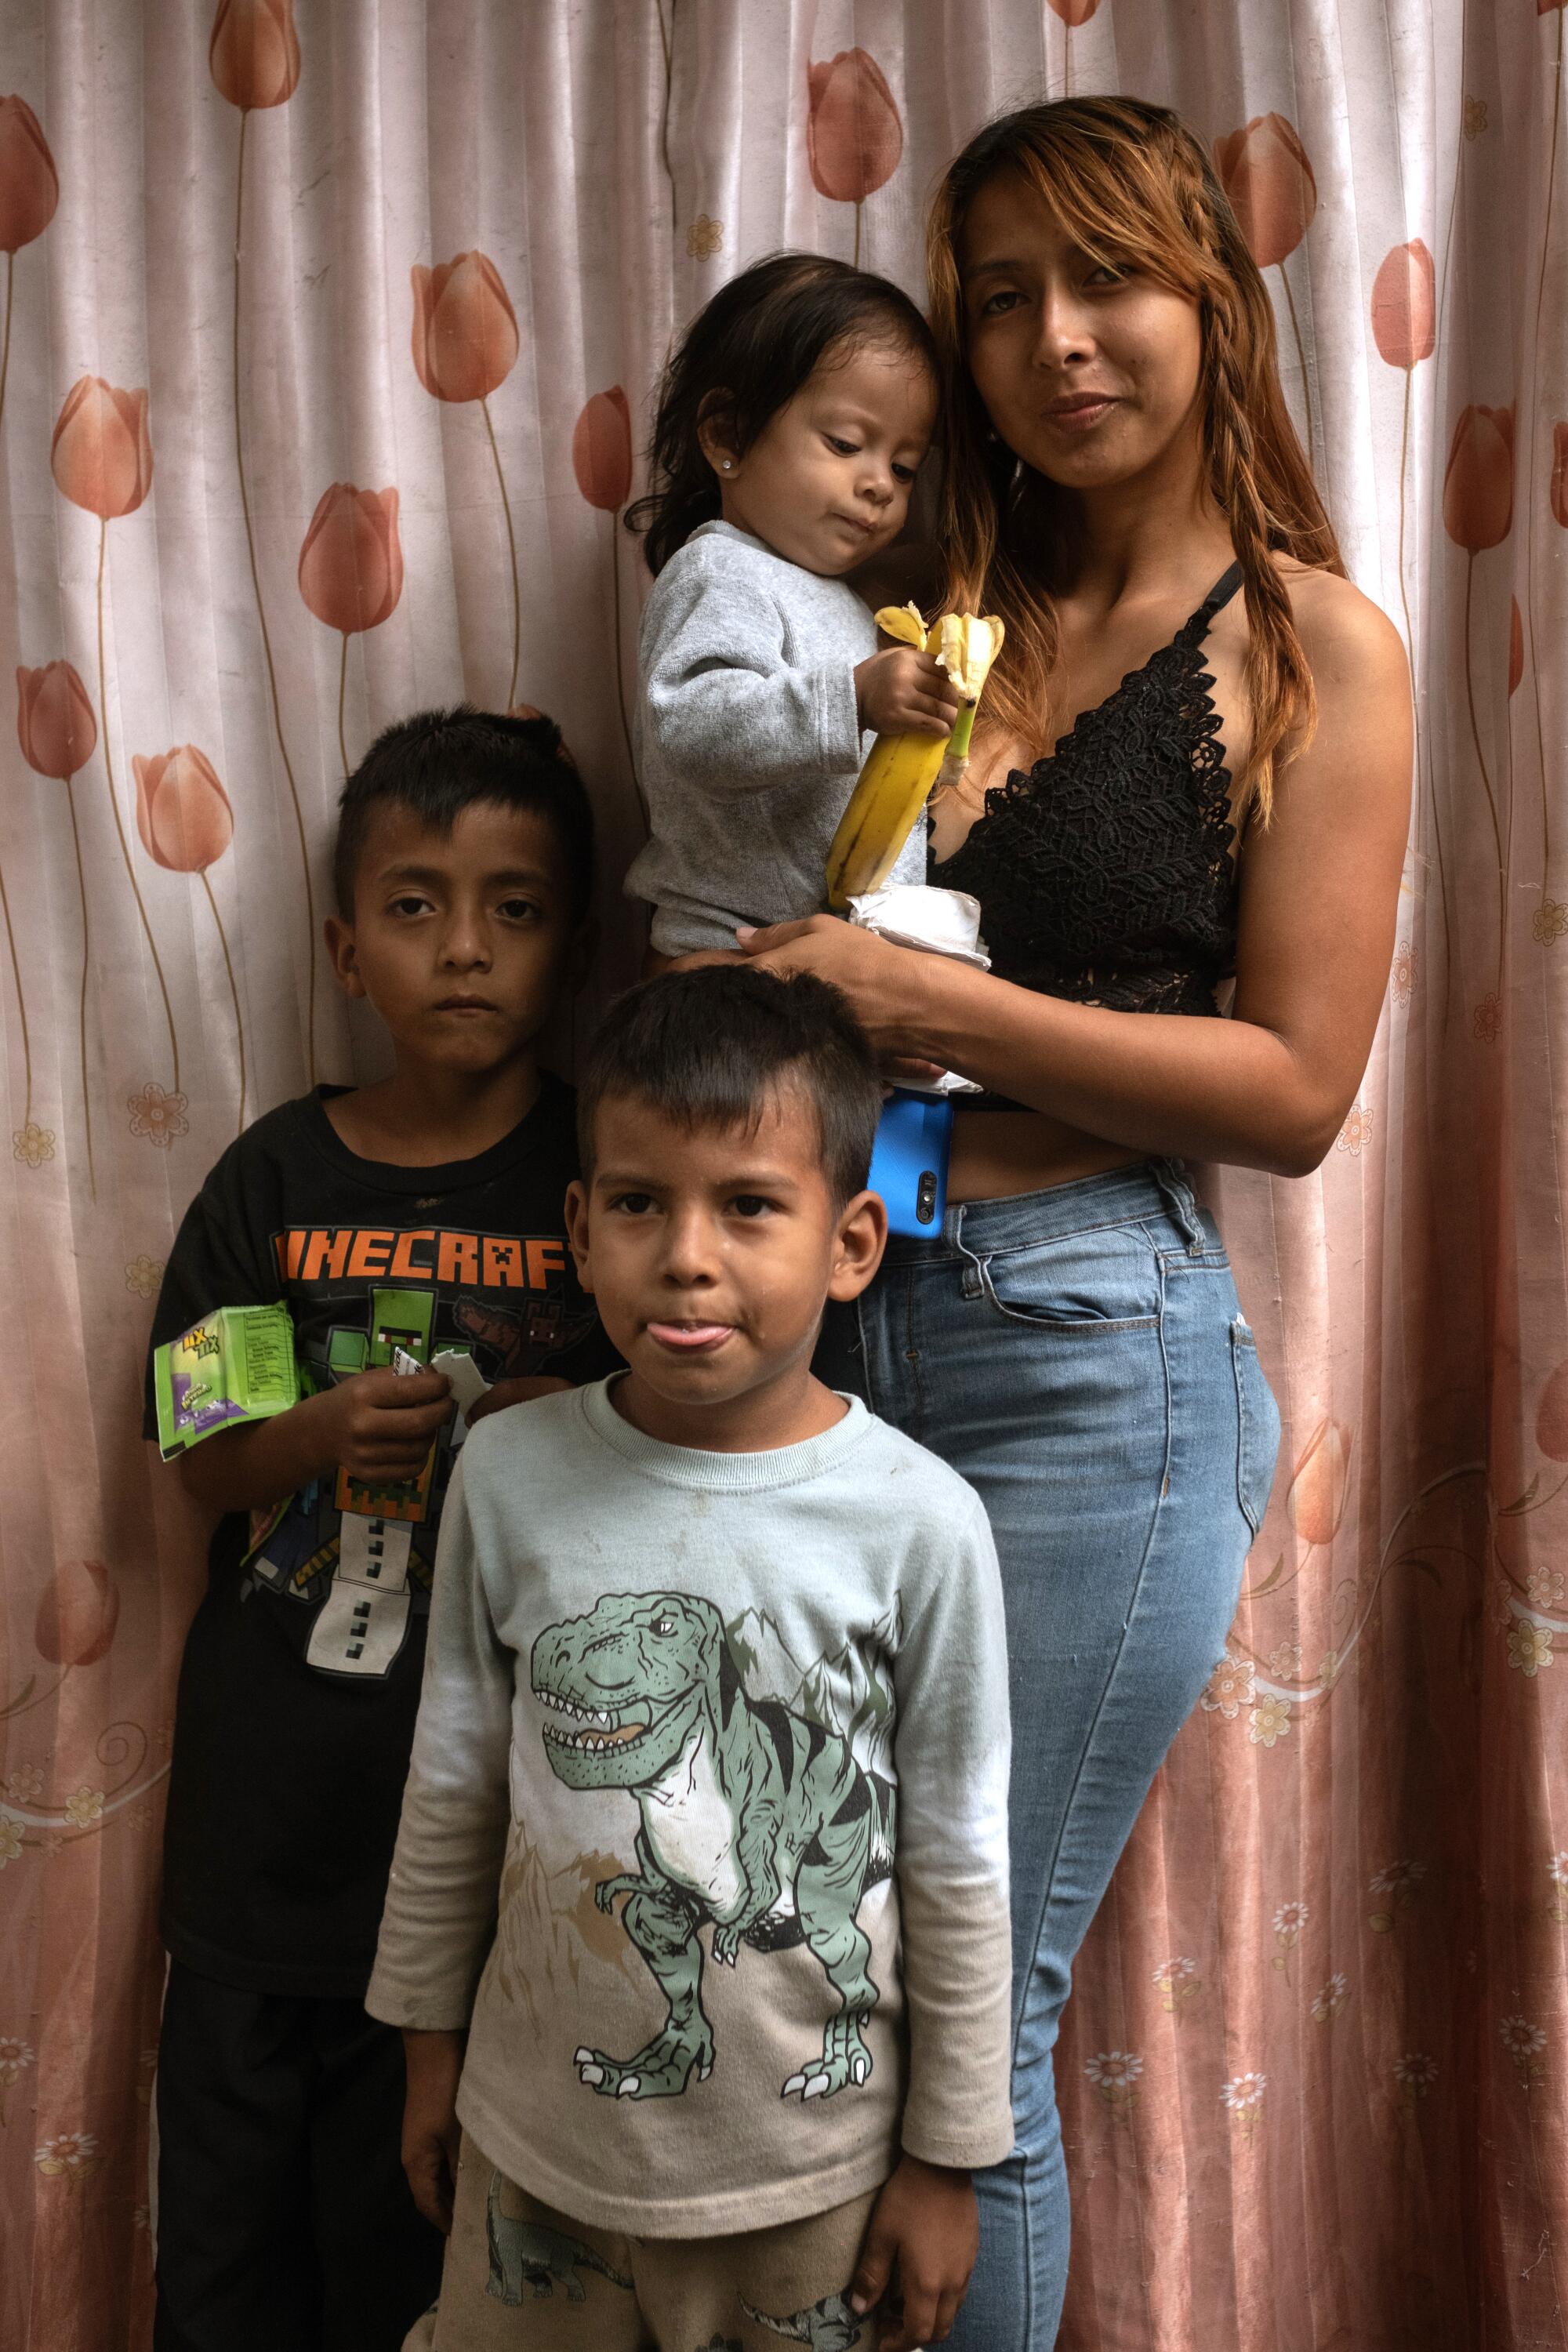 Keyla Arriaga, 23, is traveling with her three children - Dylan, Ryan, and Dana - fleeing